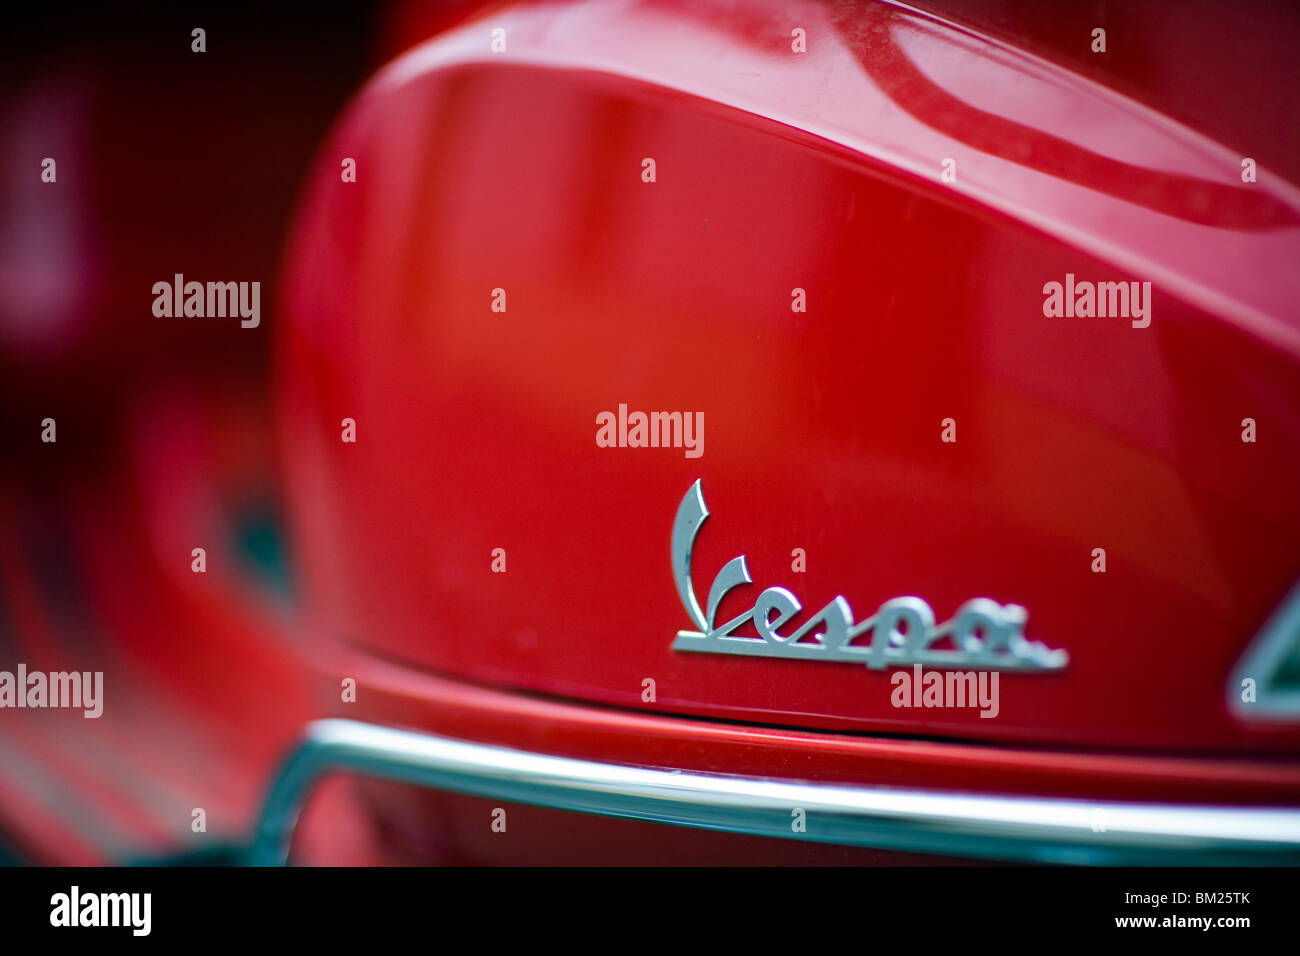 The Vespa brand logo from a red scooter, Seville, Spain Stock Photo